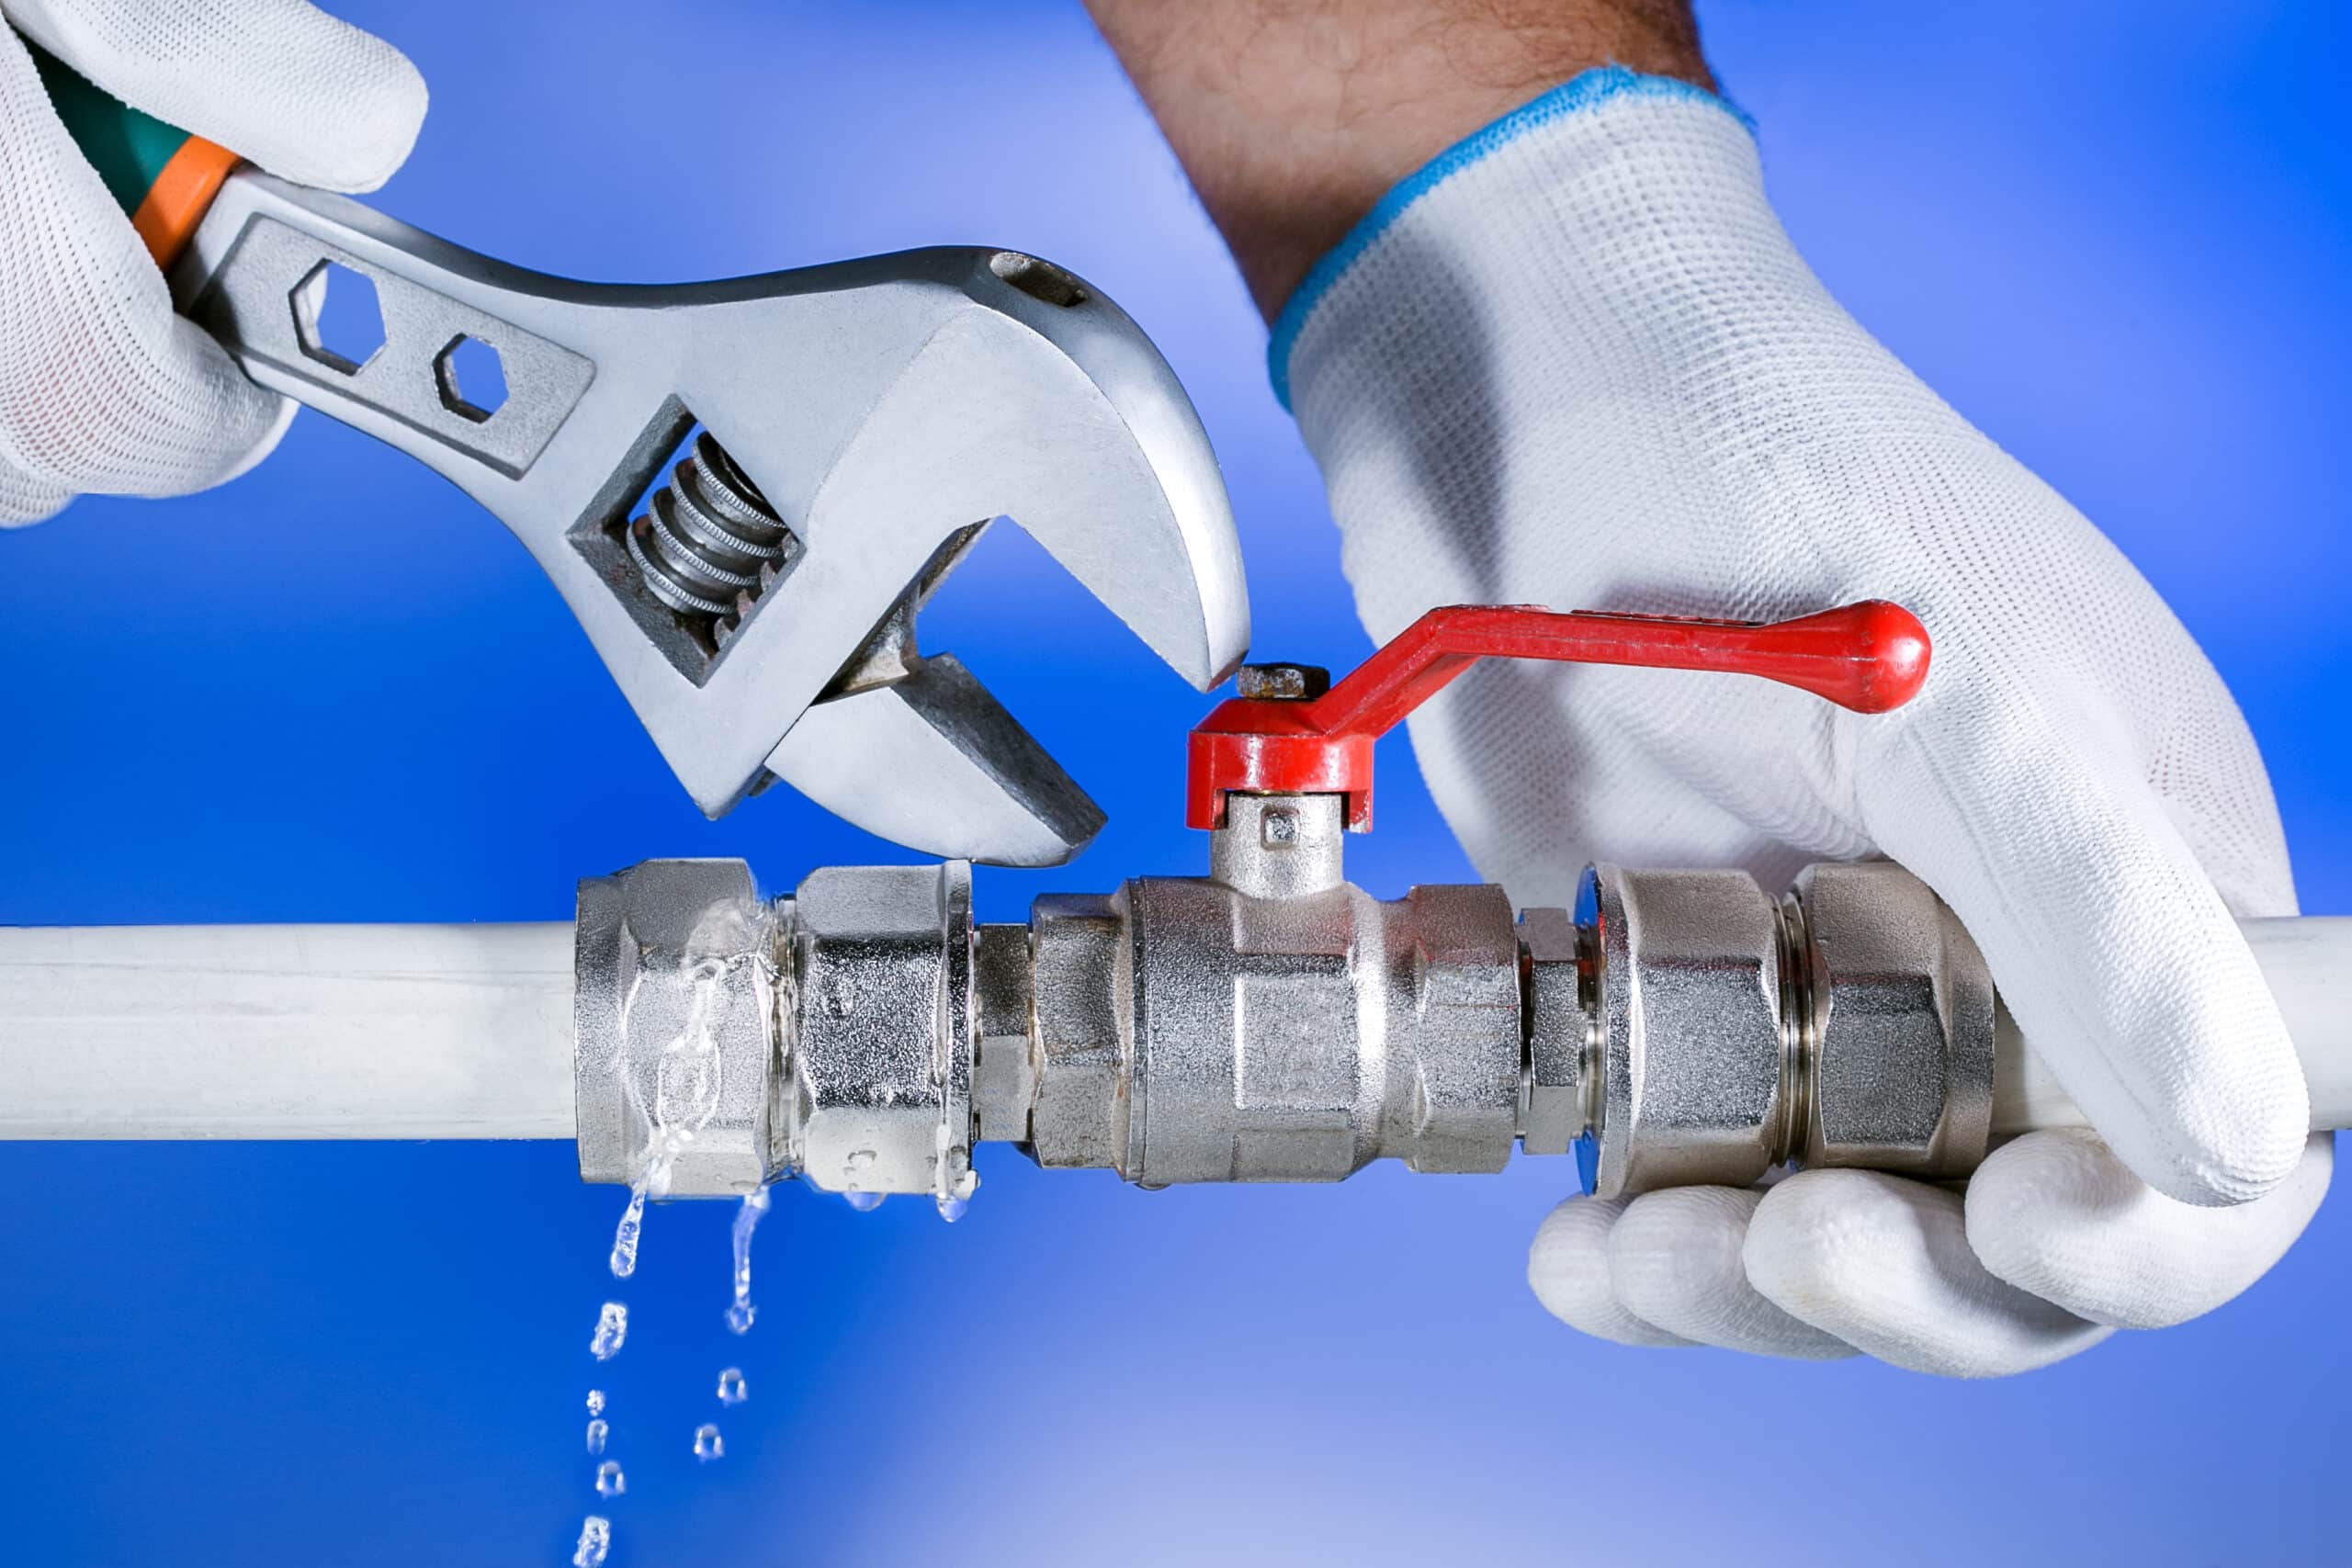 emergency plumber services